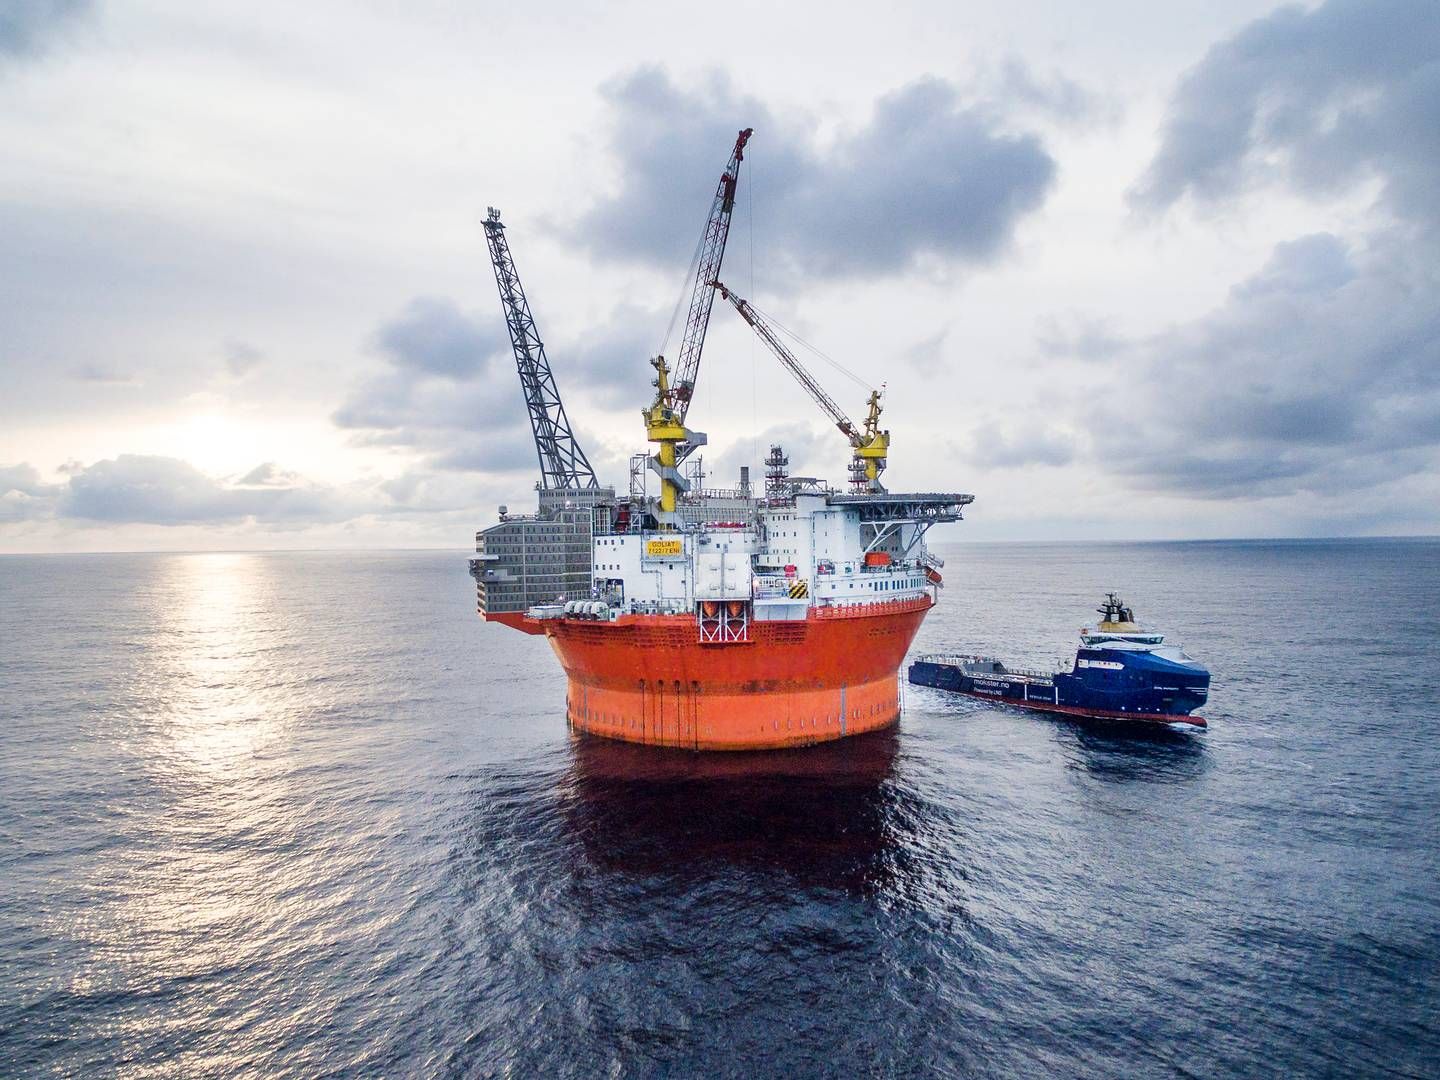 Currently, Vår Energi has a goal of increasing production to over 350,000 barrels per day by the end of 2025. | Photo: Pr / Vår Energi